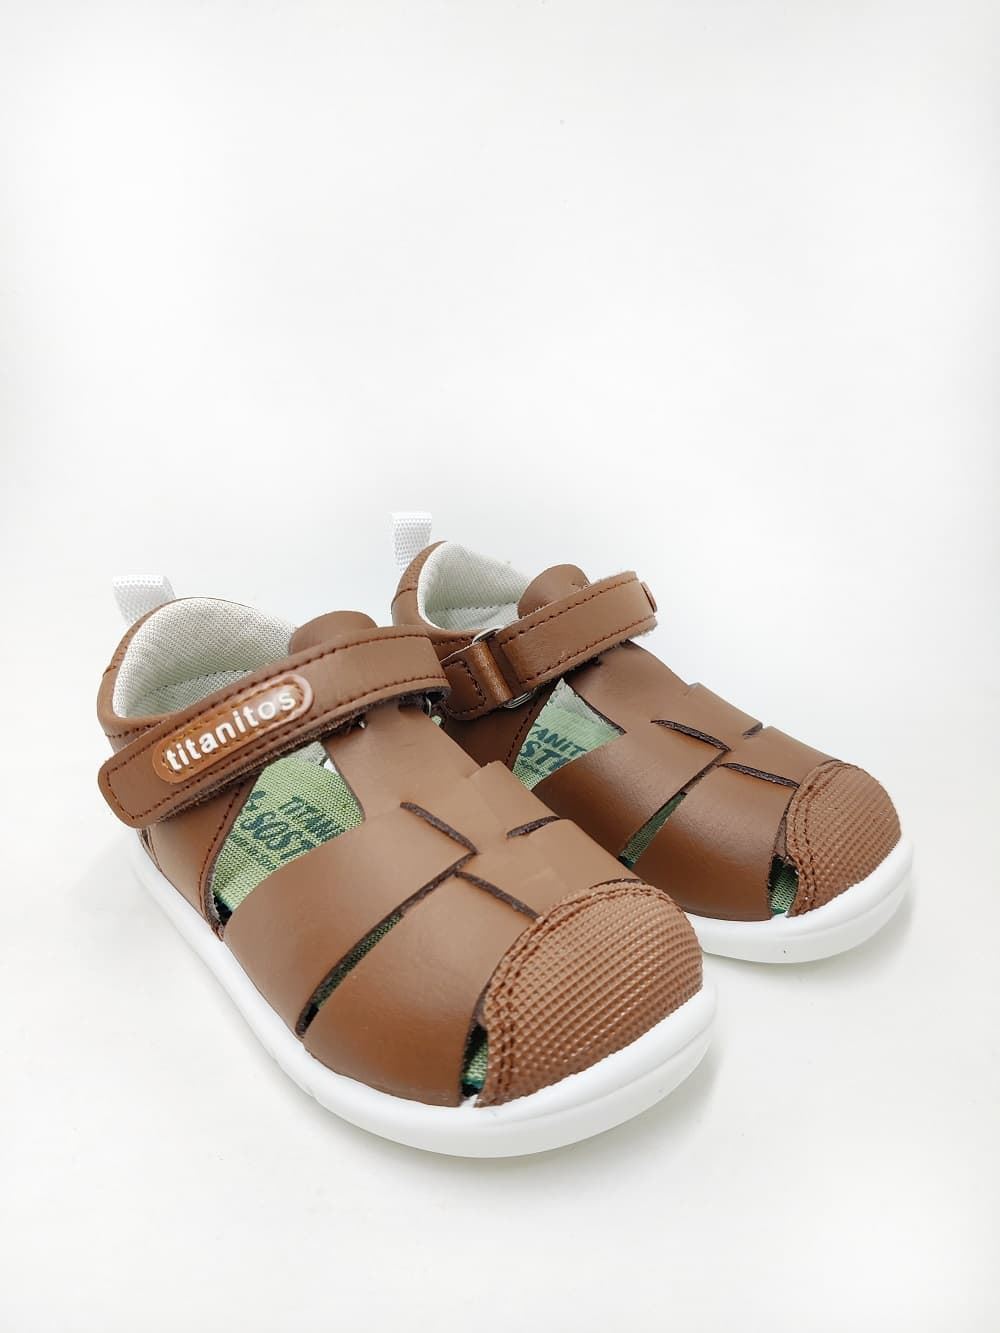 Titanitos Respectful baby sandals Eric Roble - Image 2